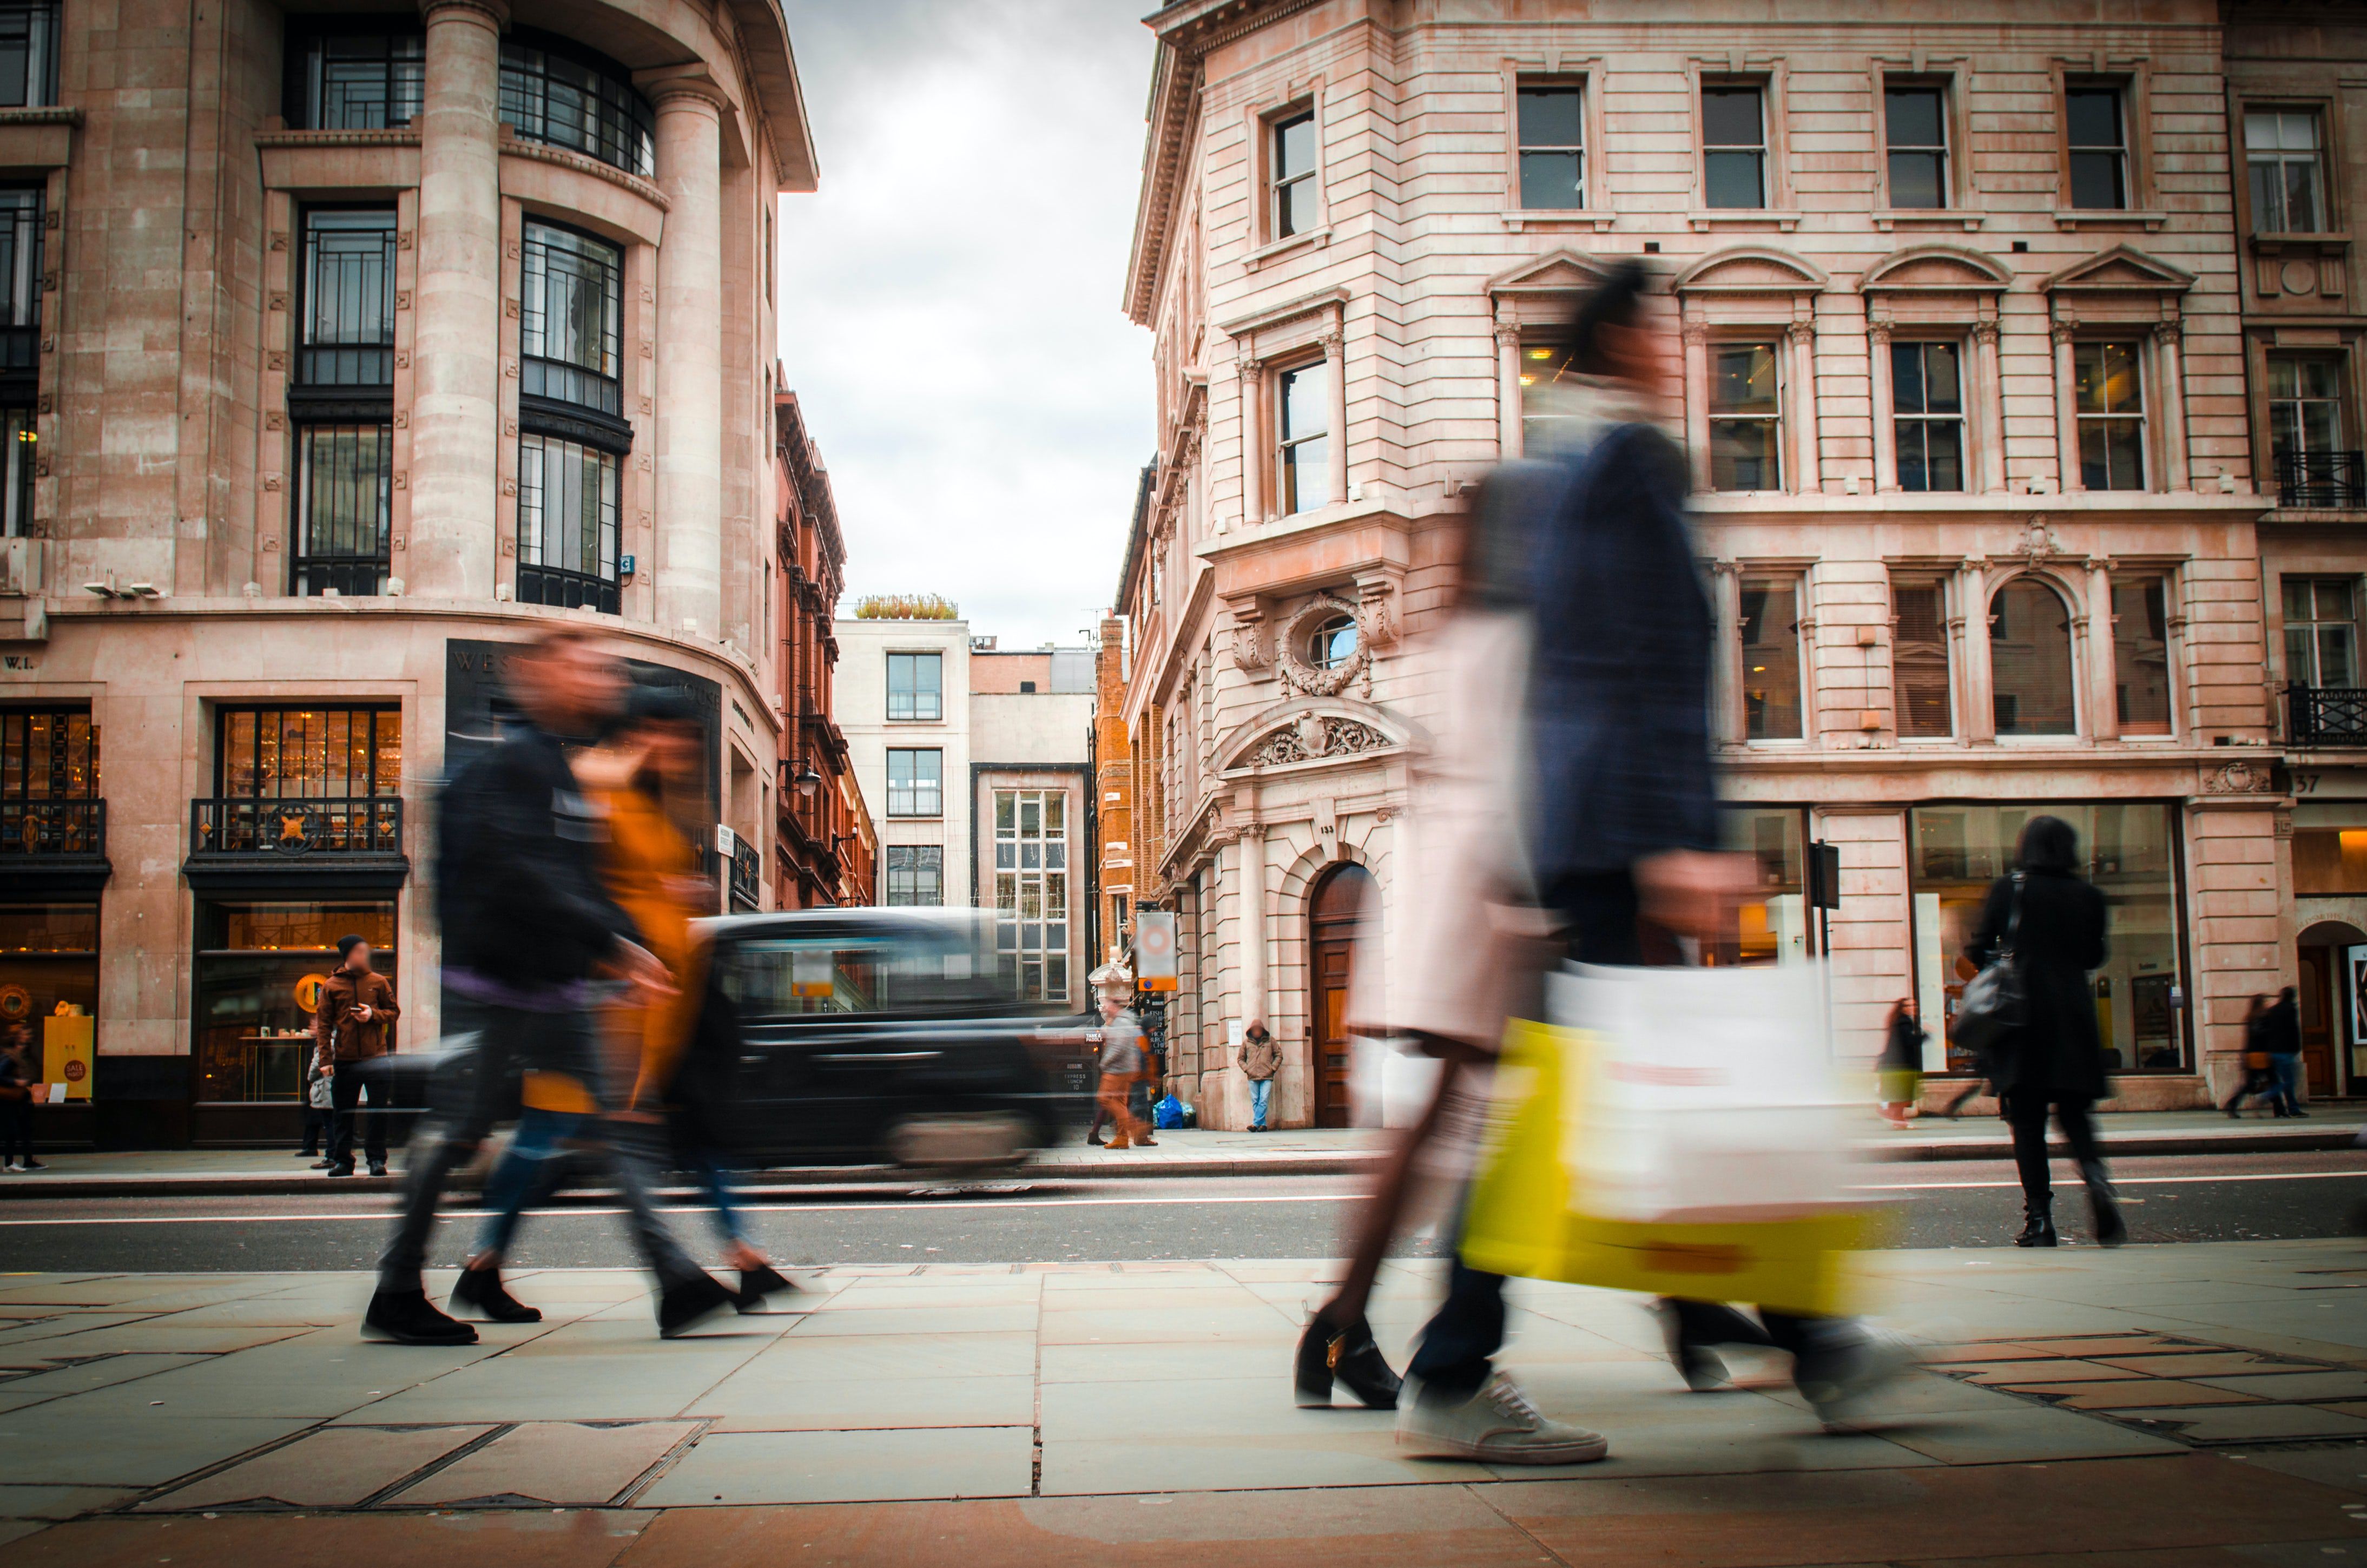 London’s Prime Shopping Street Feels Lingering Effects of Pandemic